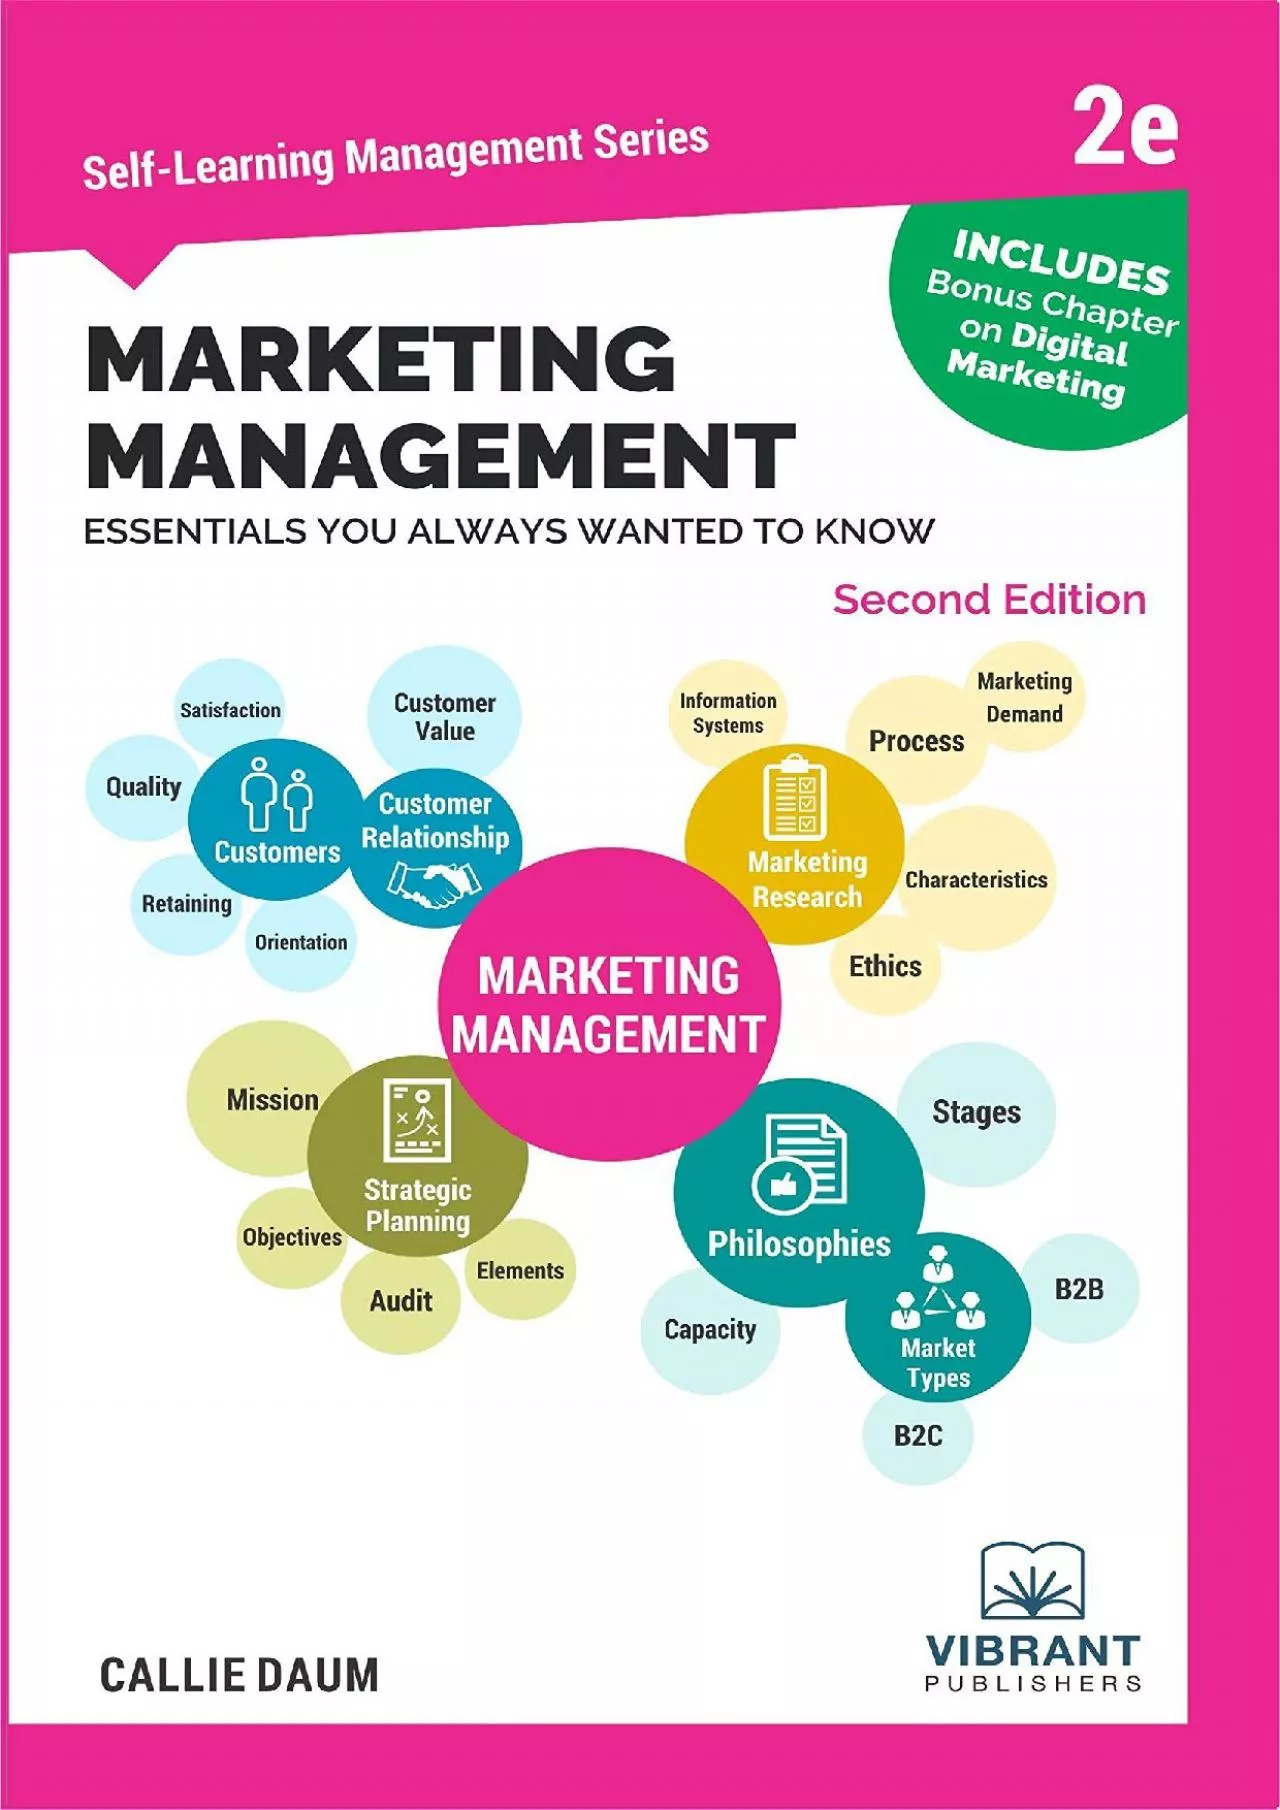 Marketing Management Essentials You Always Wanted To Know Second Edition Self-Learning